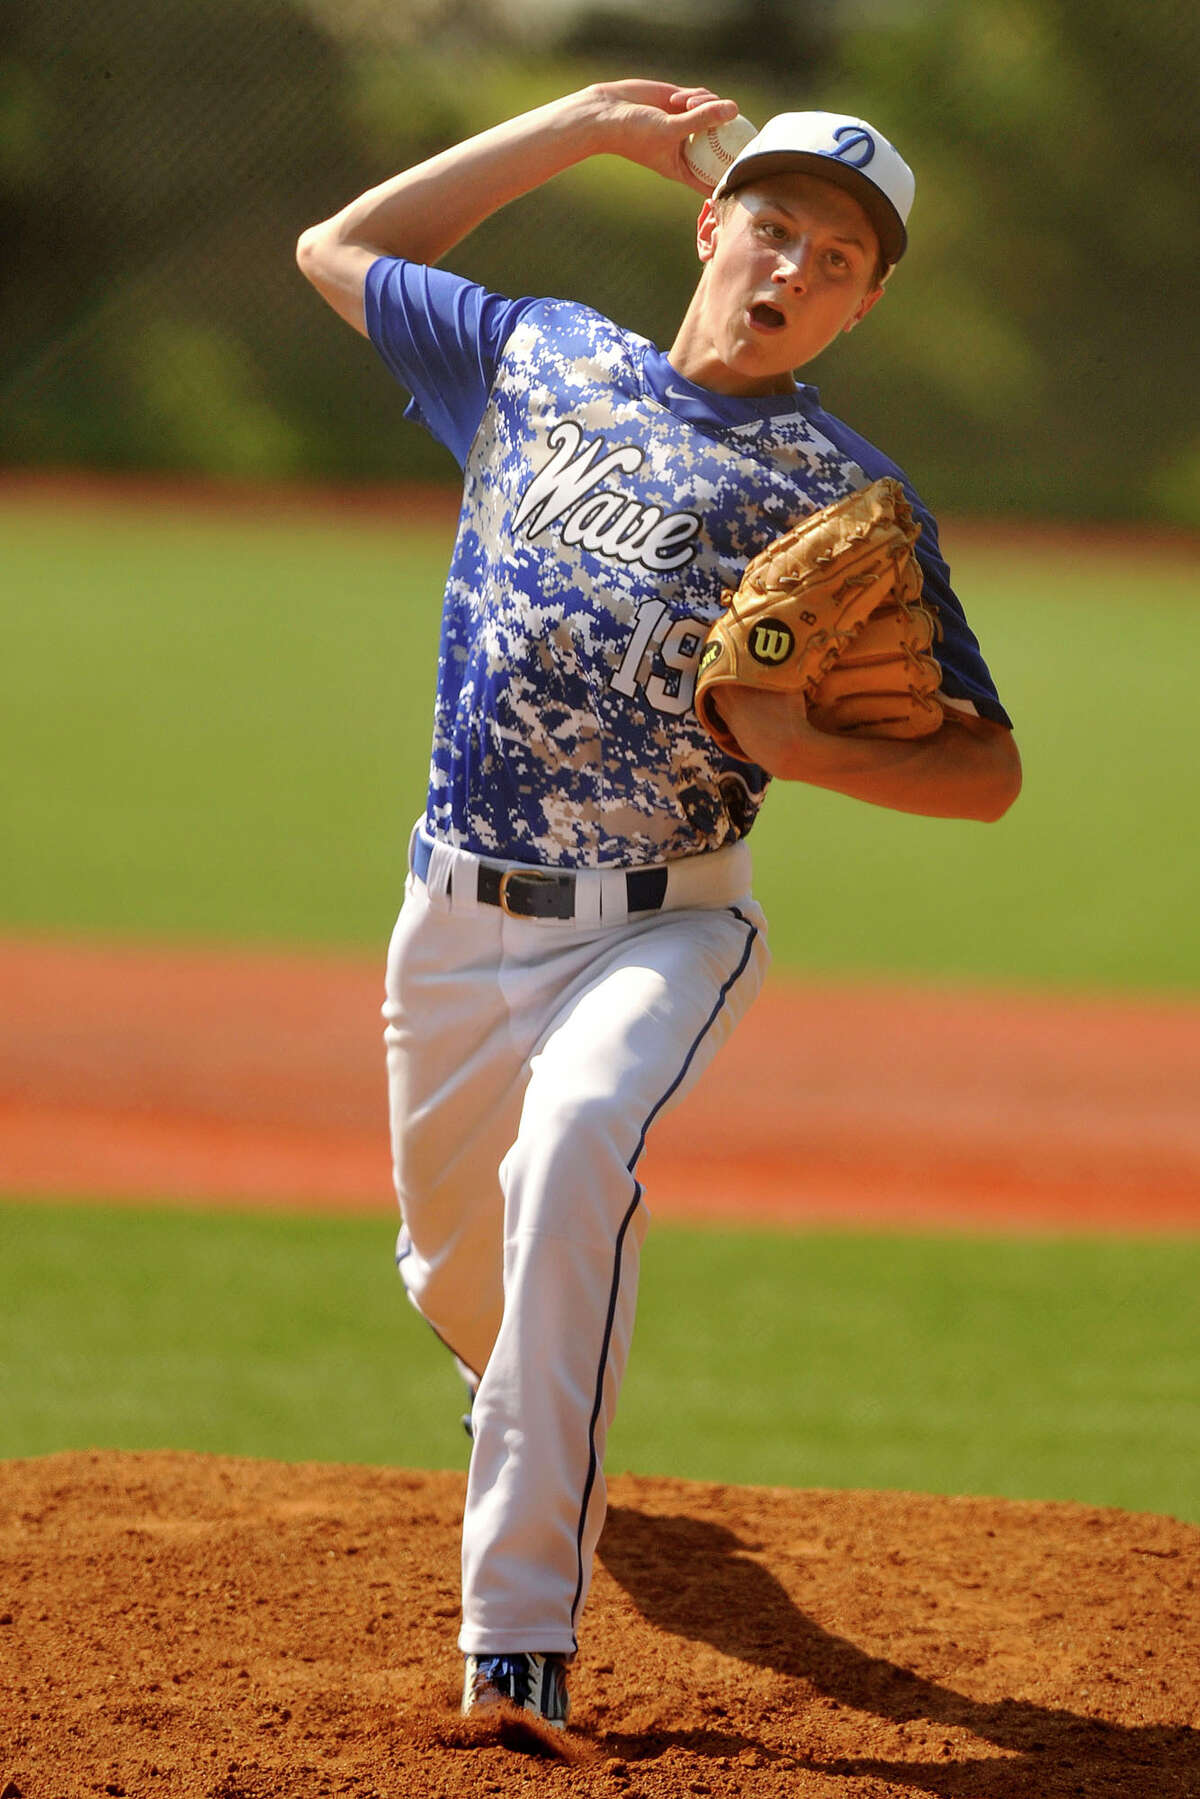 Stephen Barston, Darien Barston pitched to contact, trusting his defense but he did not walk many and he led the Blue Wave to the No. 1 seed in the FCIAC playoffs.